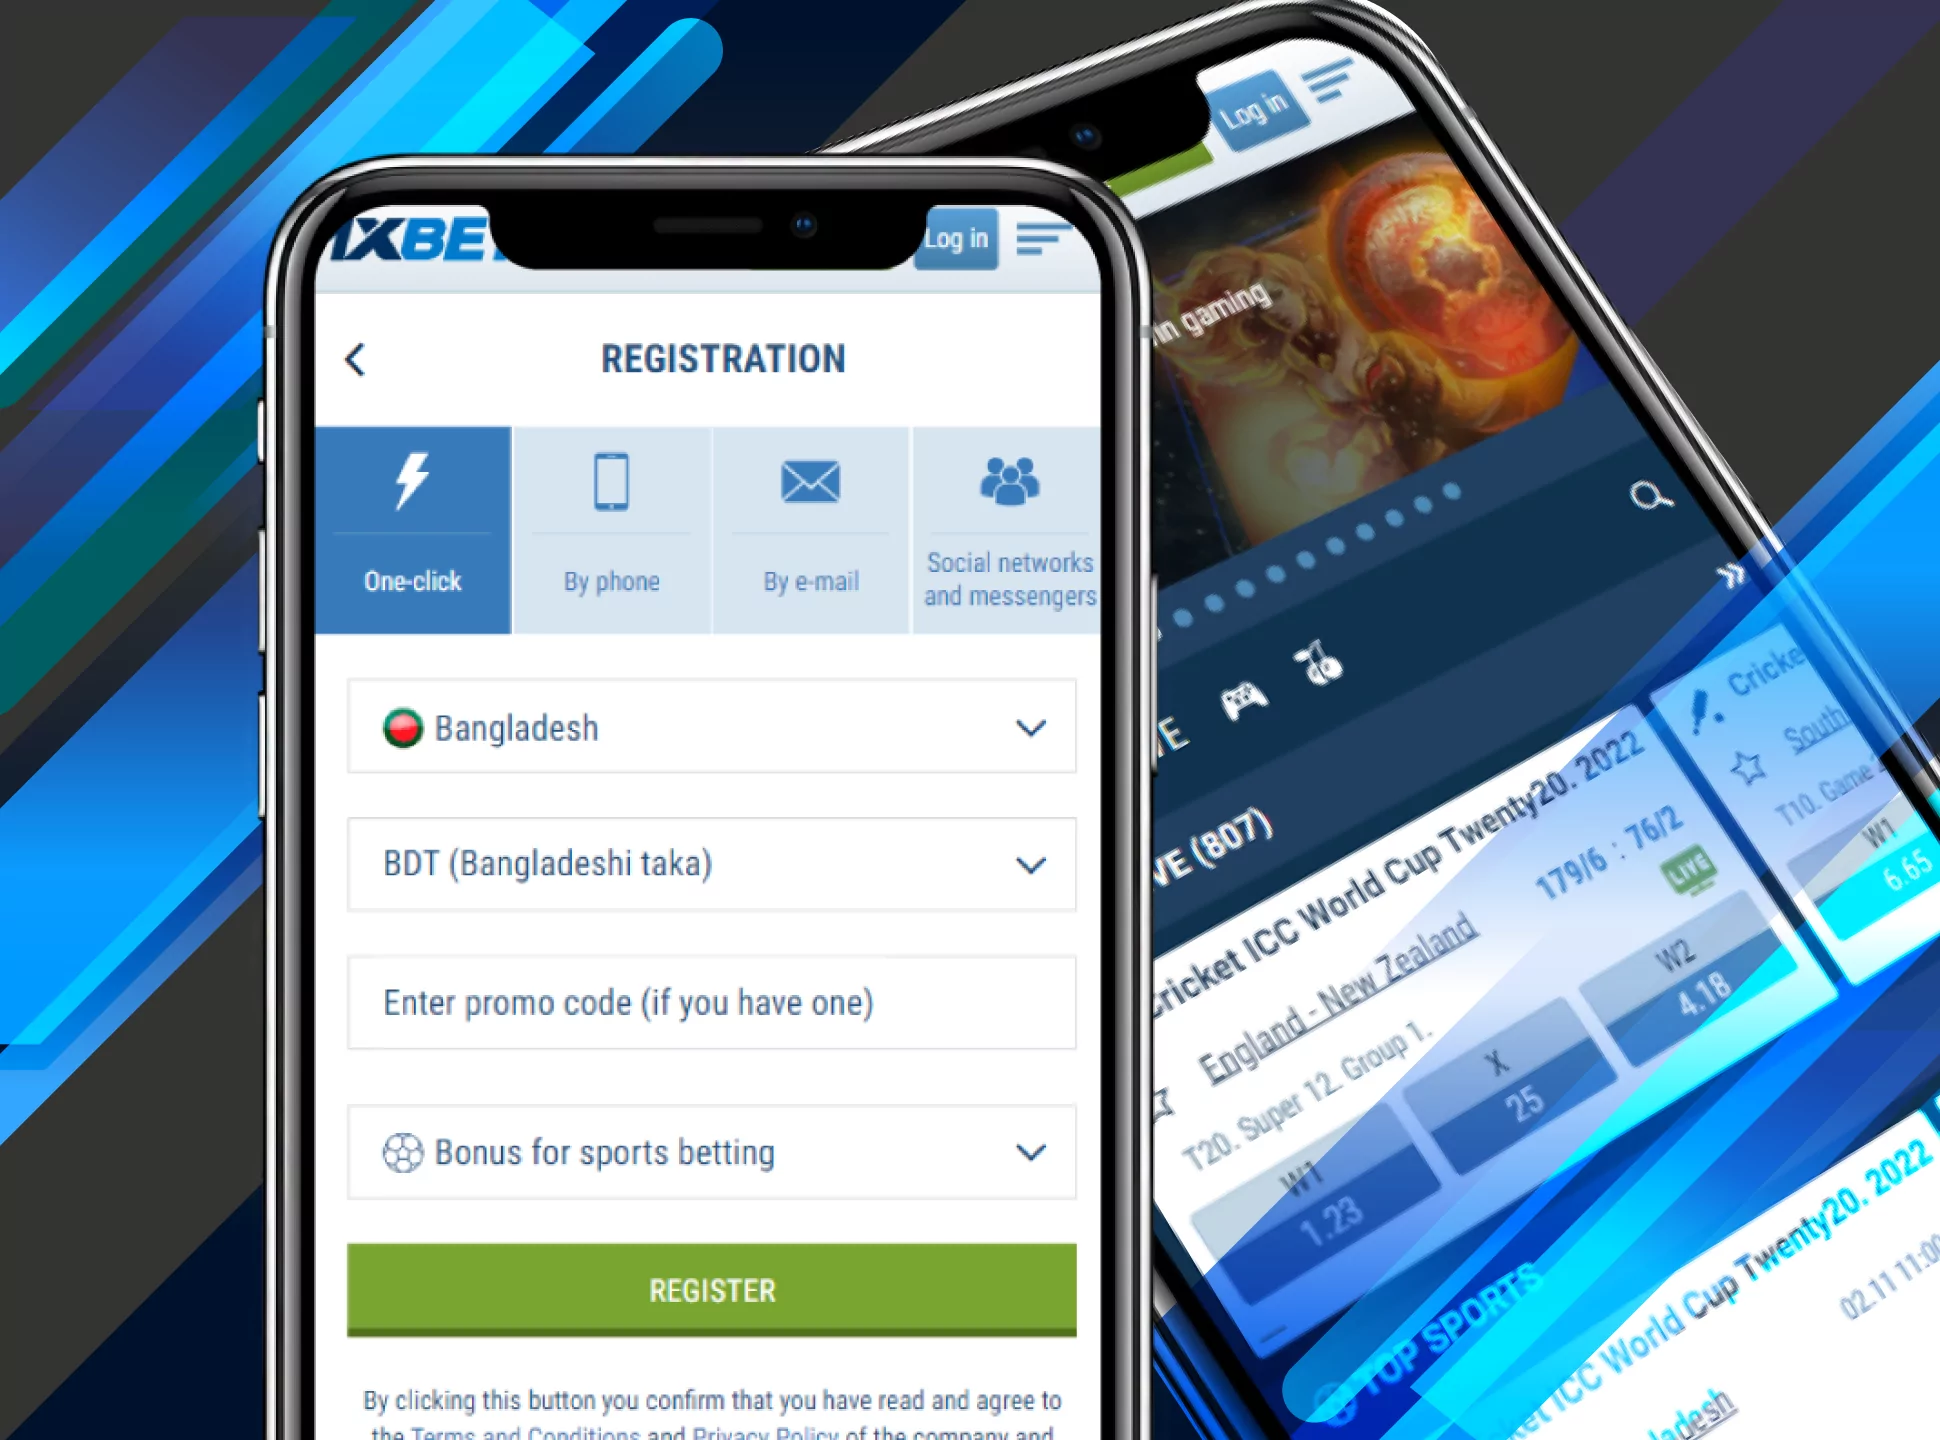 You can create an account in the 1xBet mobile app.